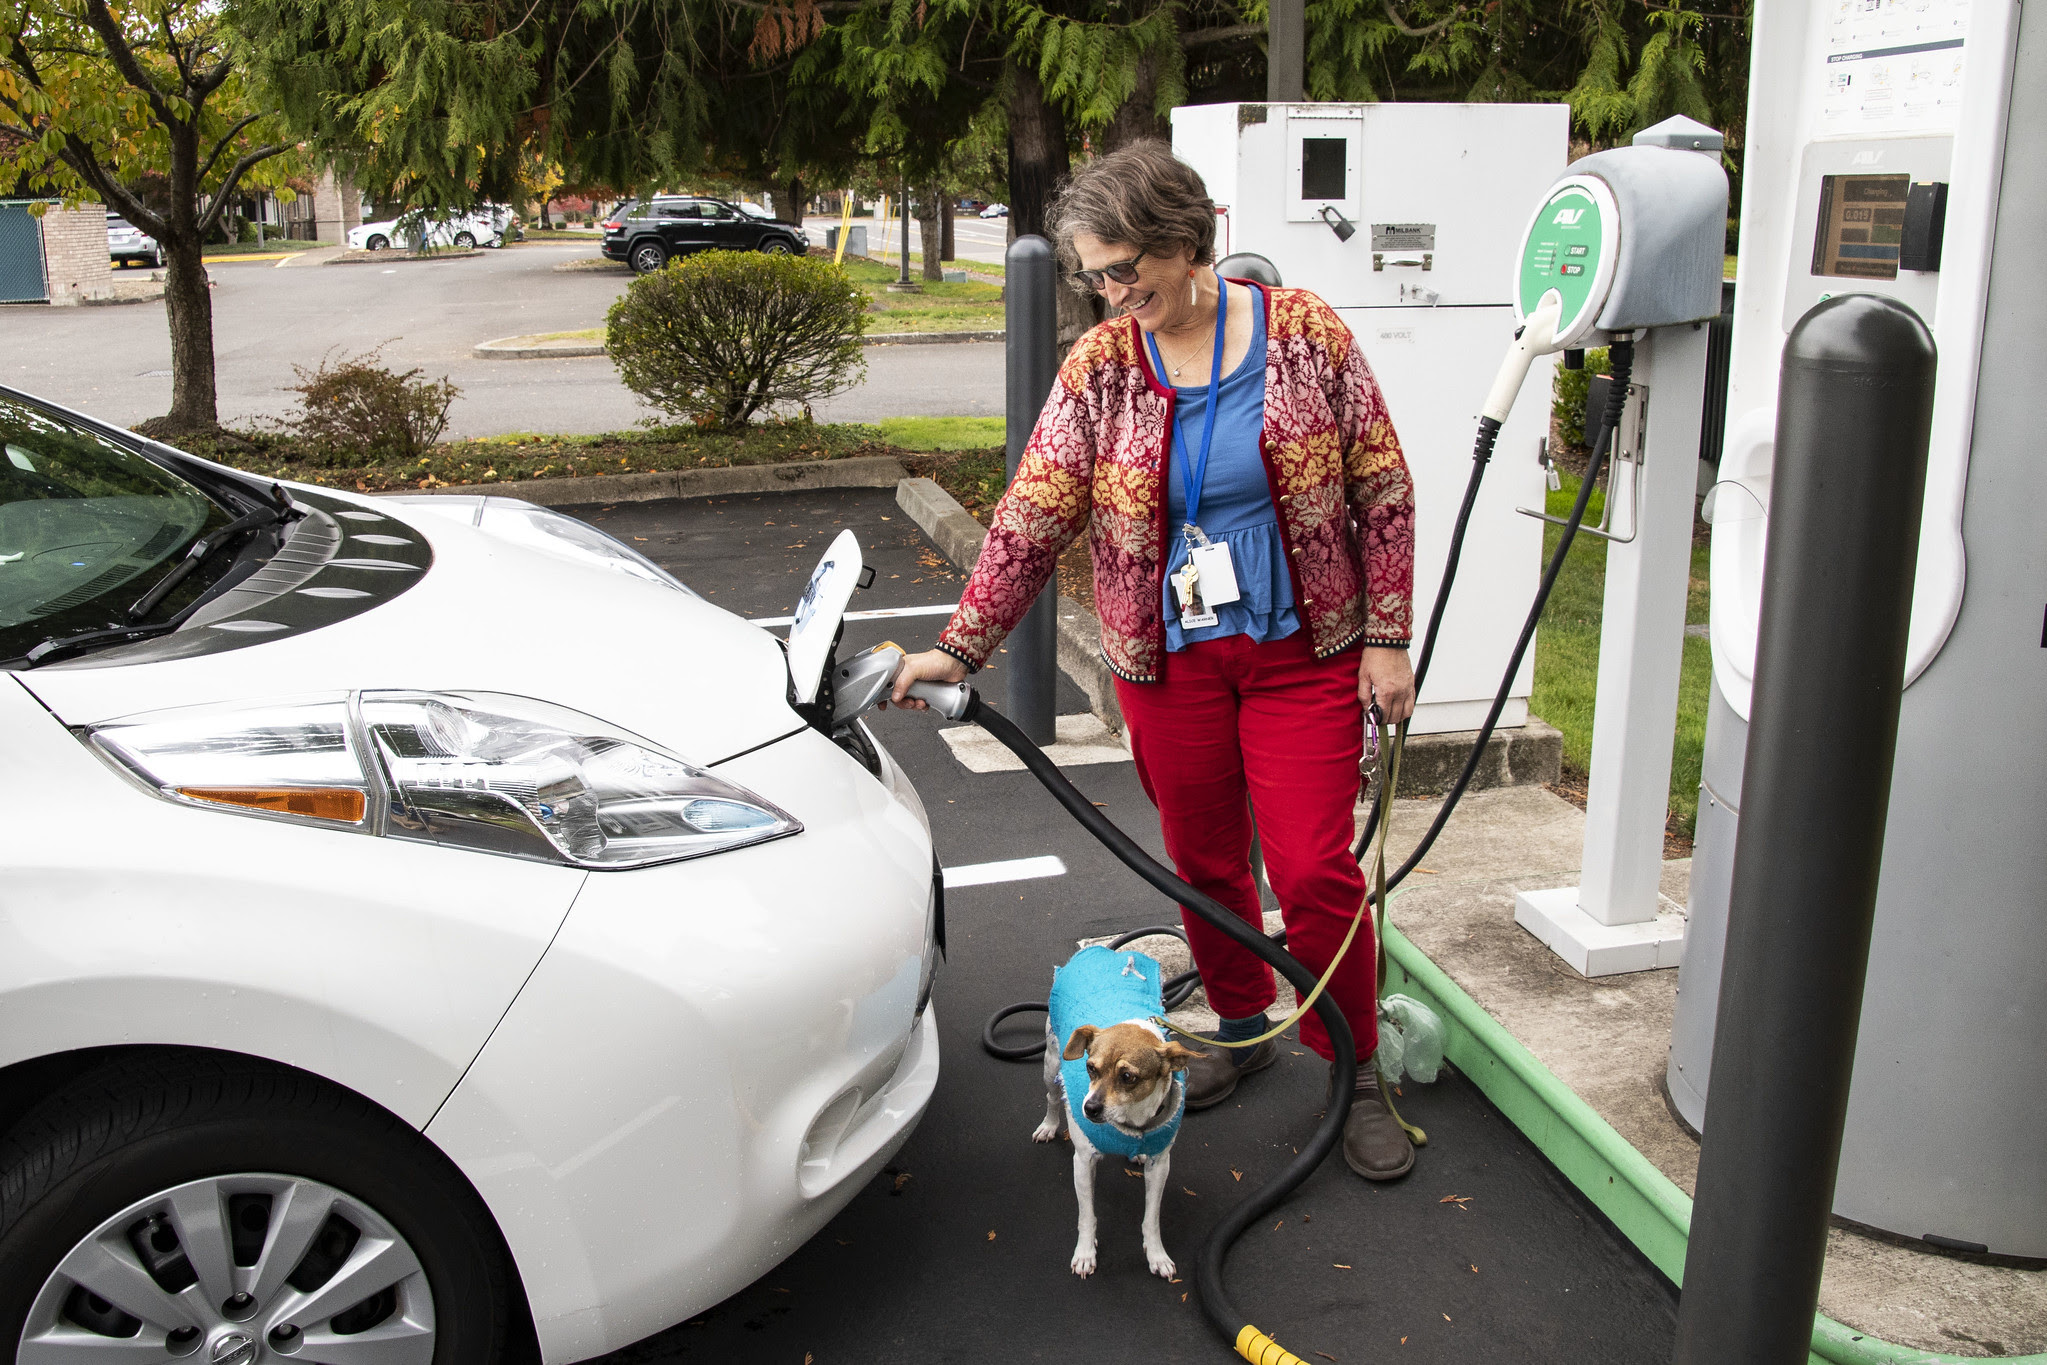 A woman and her dog stand at an electric vehicle charger, plugging it in to charge a white electric vehicle.